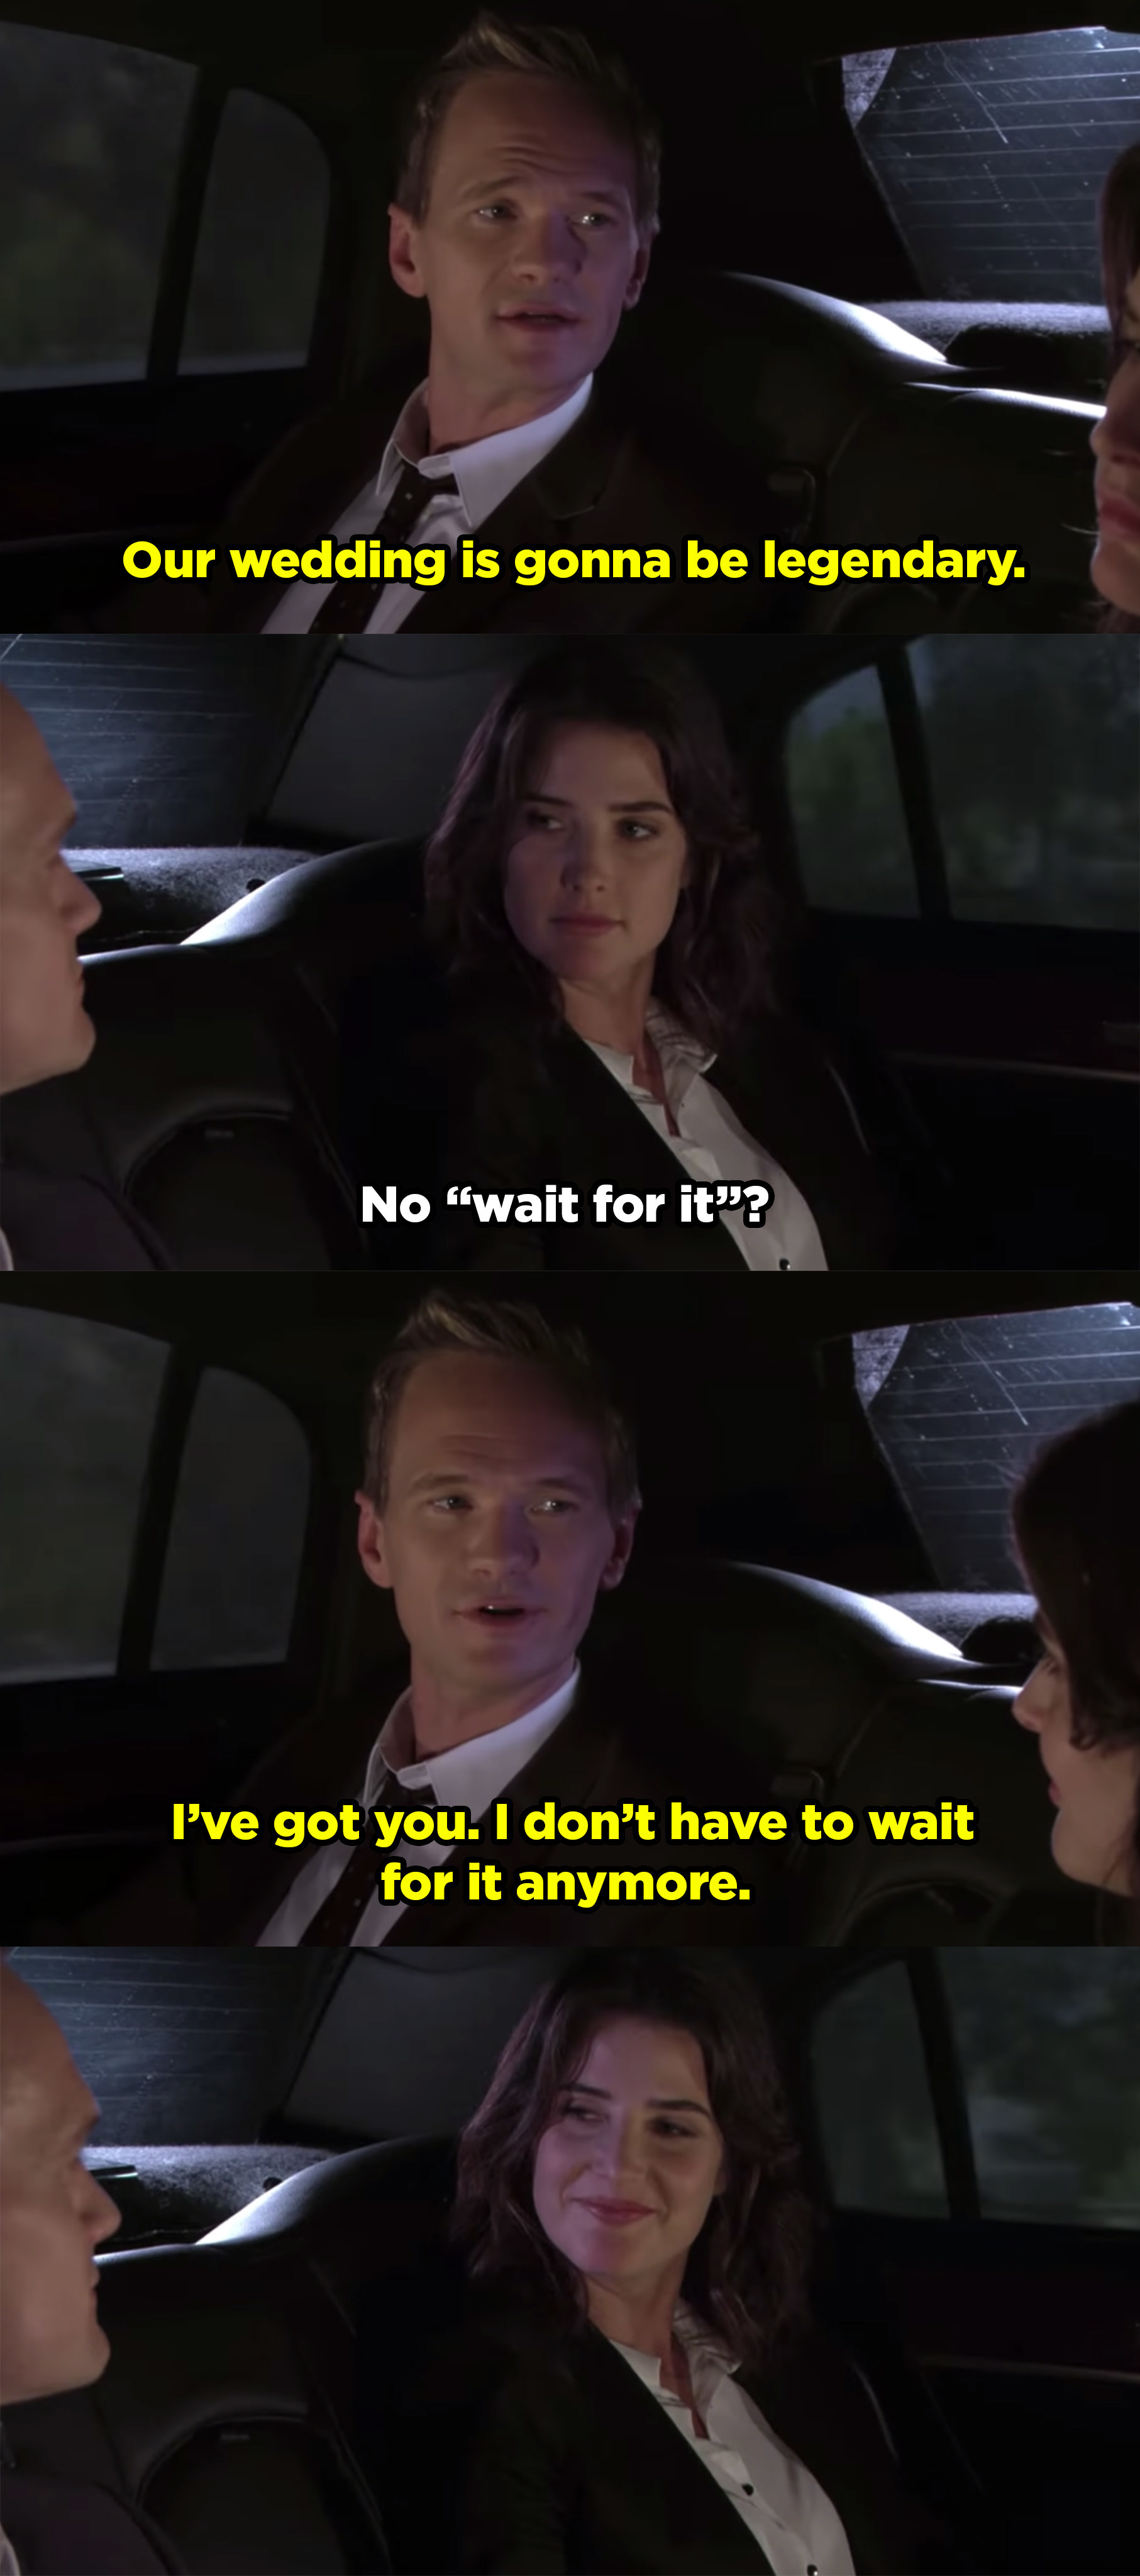 Barney telling Robin their wedding will be legendary. Robin asks why he didn&#x27;t say &quot;wait for it&quot; like he usually does and he responded, &quot;I&#x27;ve got you. I don&#x27;t have to wait for it anymore.&quot;